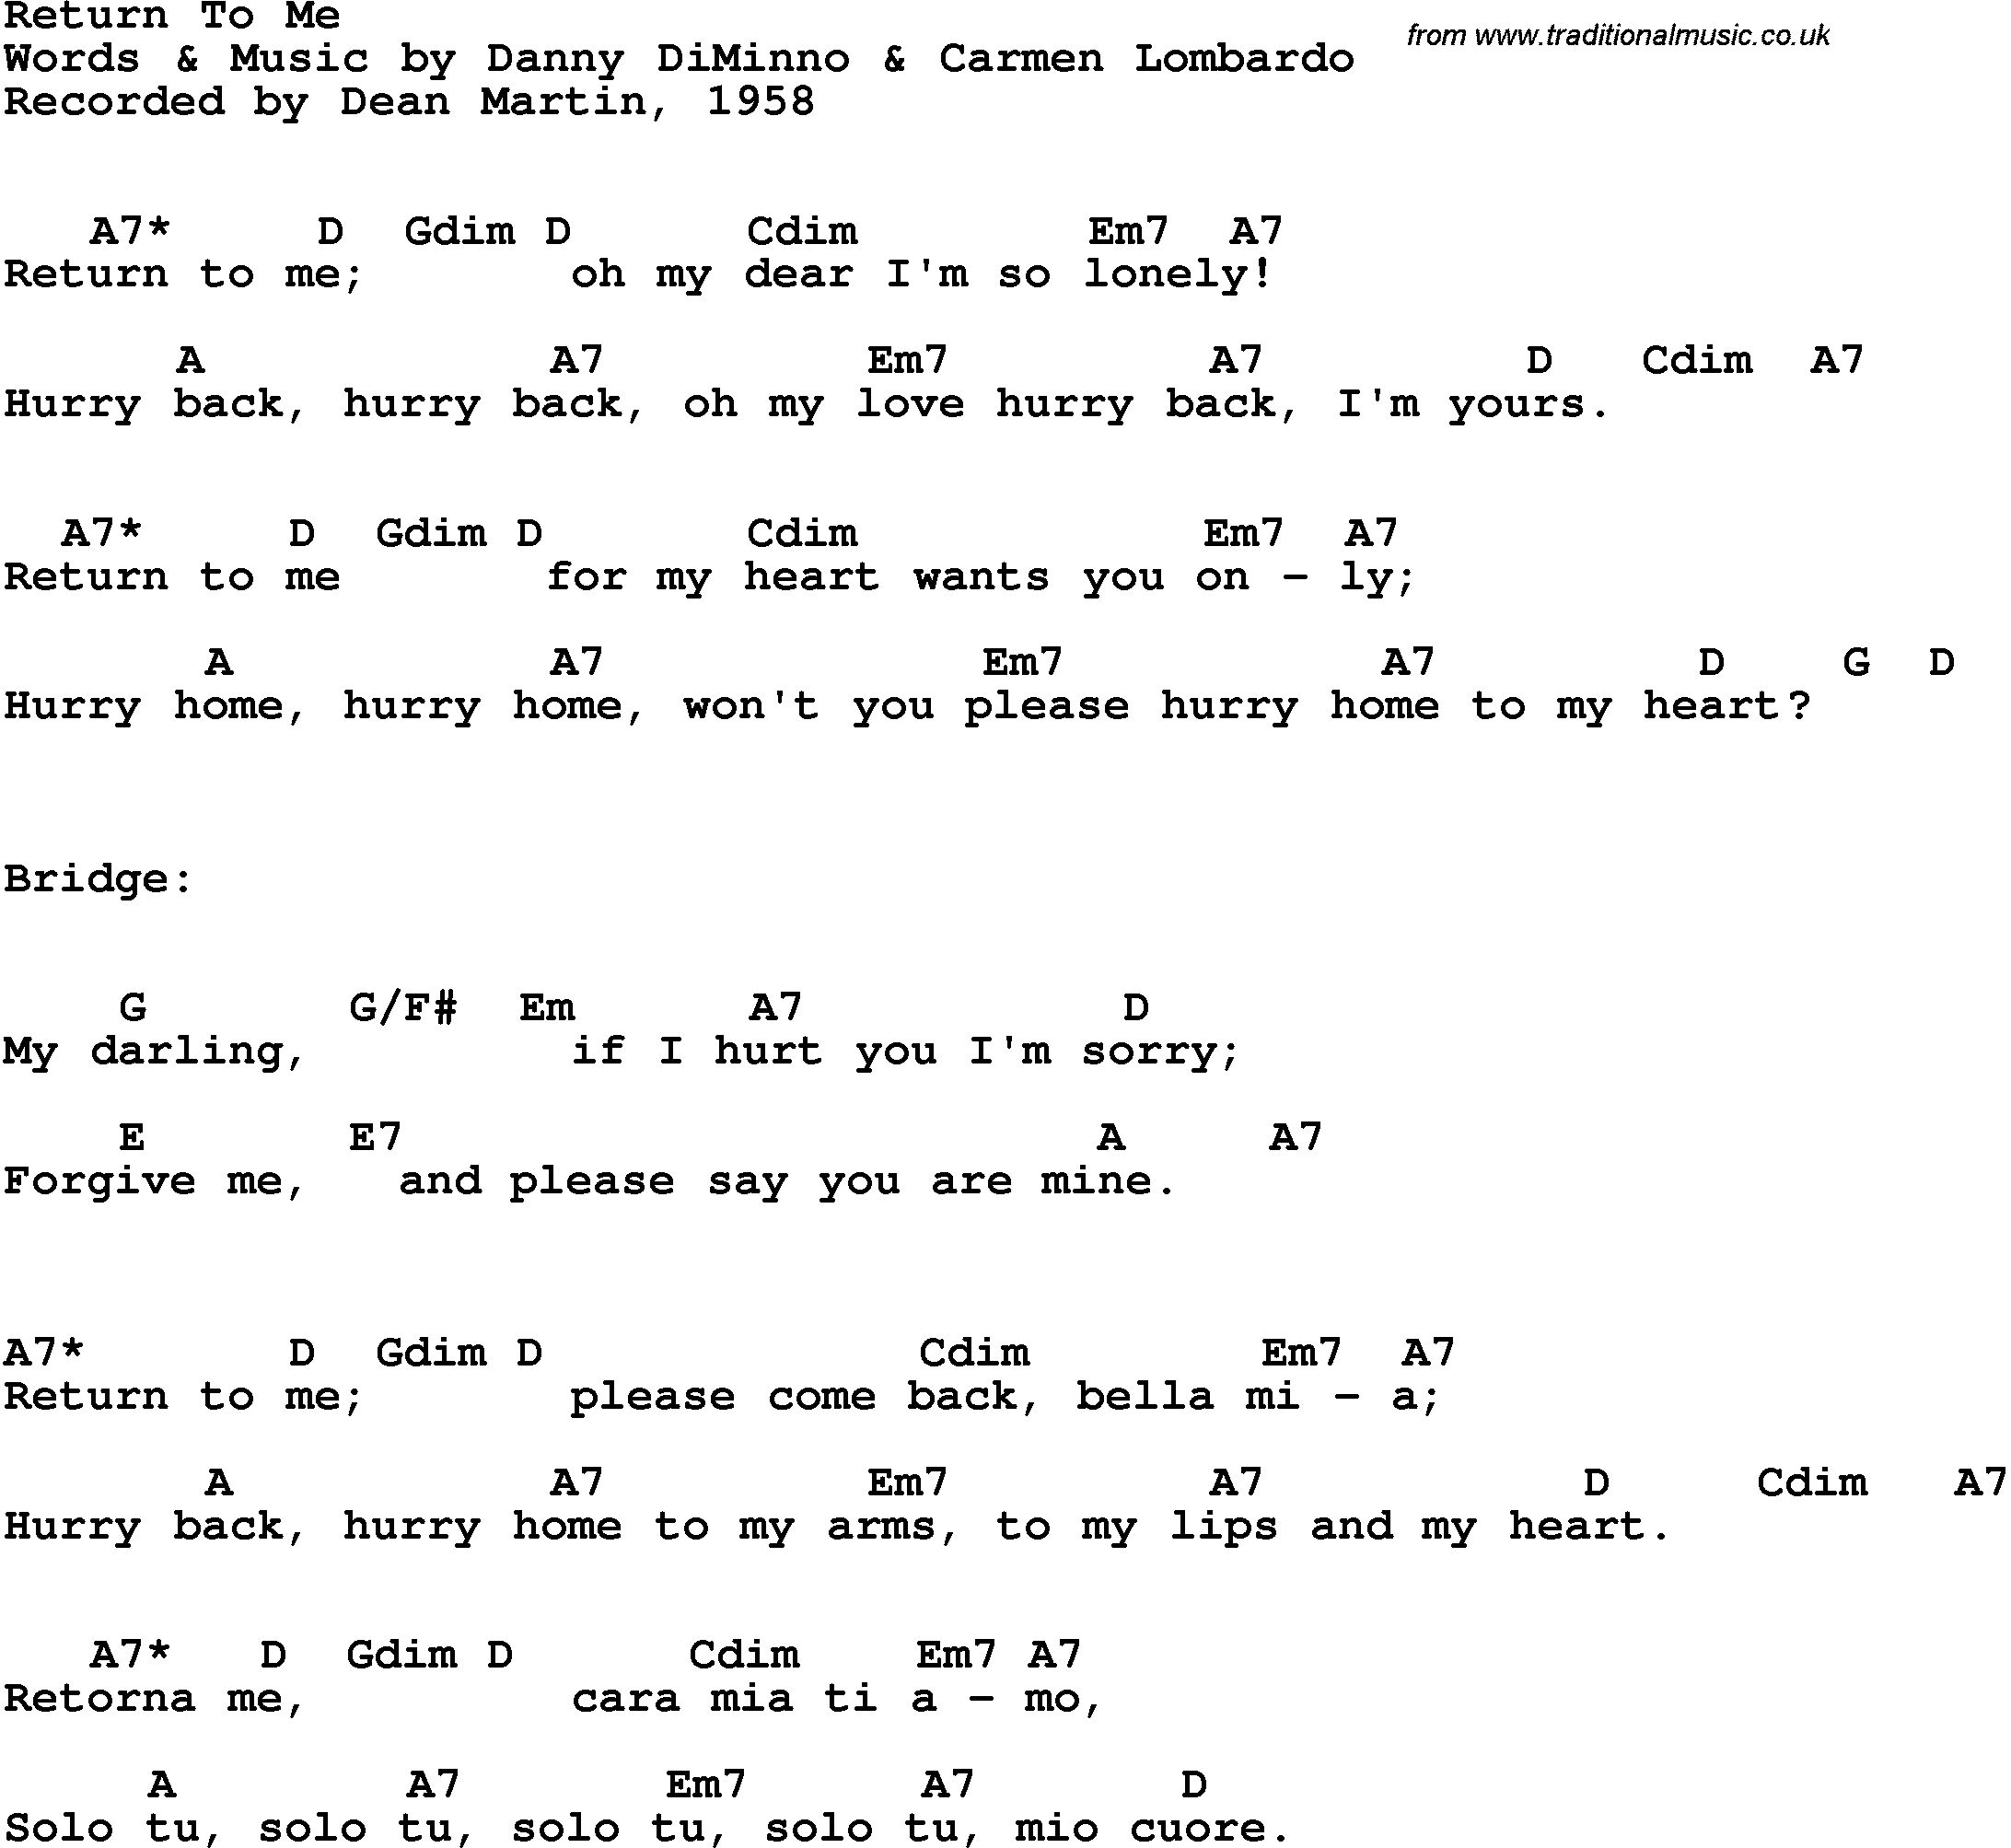 Song Lyrics with guitar chords for Return To Me - Dean Martin, 1958